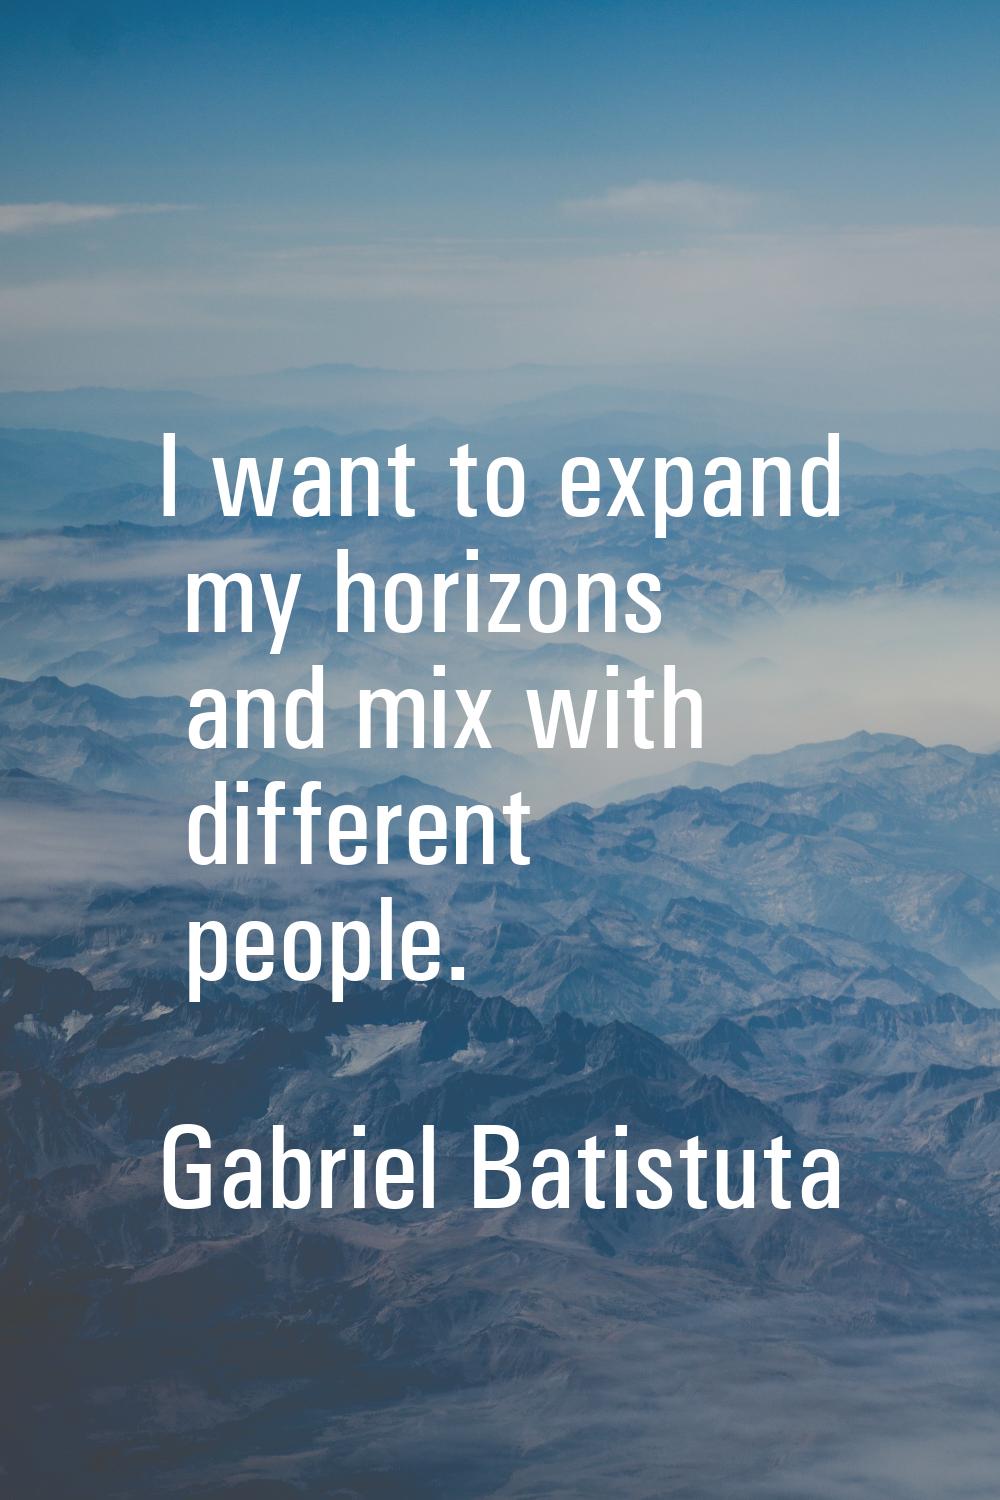 I want to expand my horizons and mix with different people.